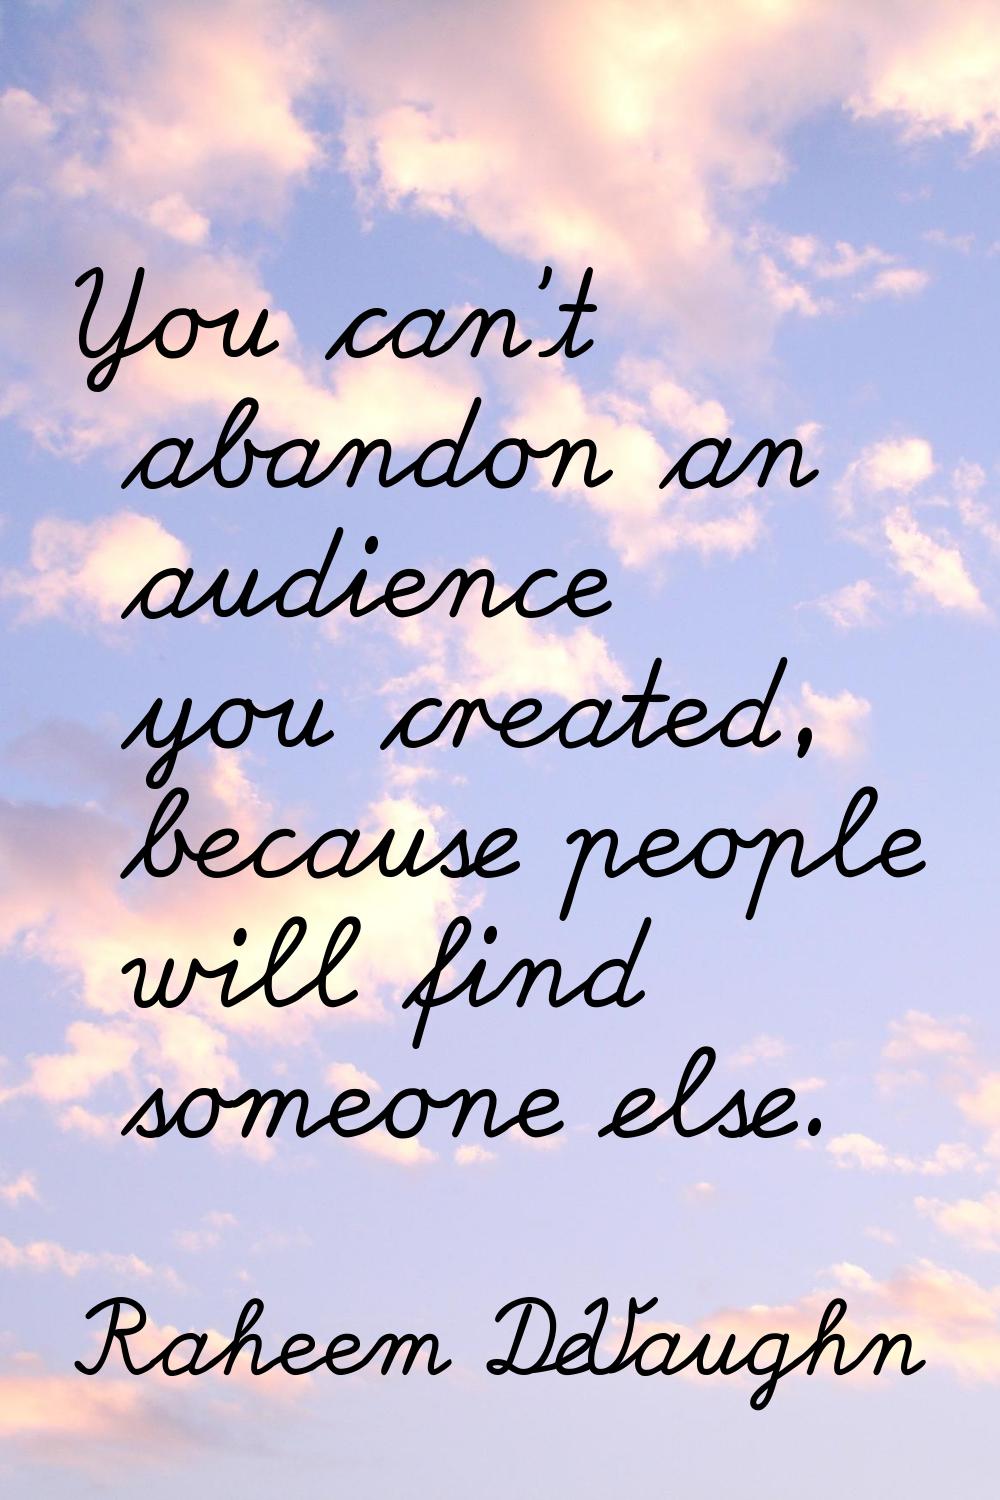 You can't abandon an audience you created, because people will find someone else.